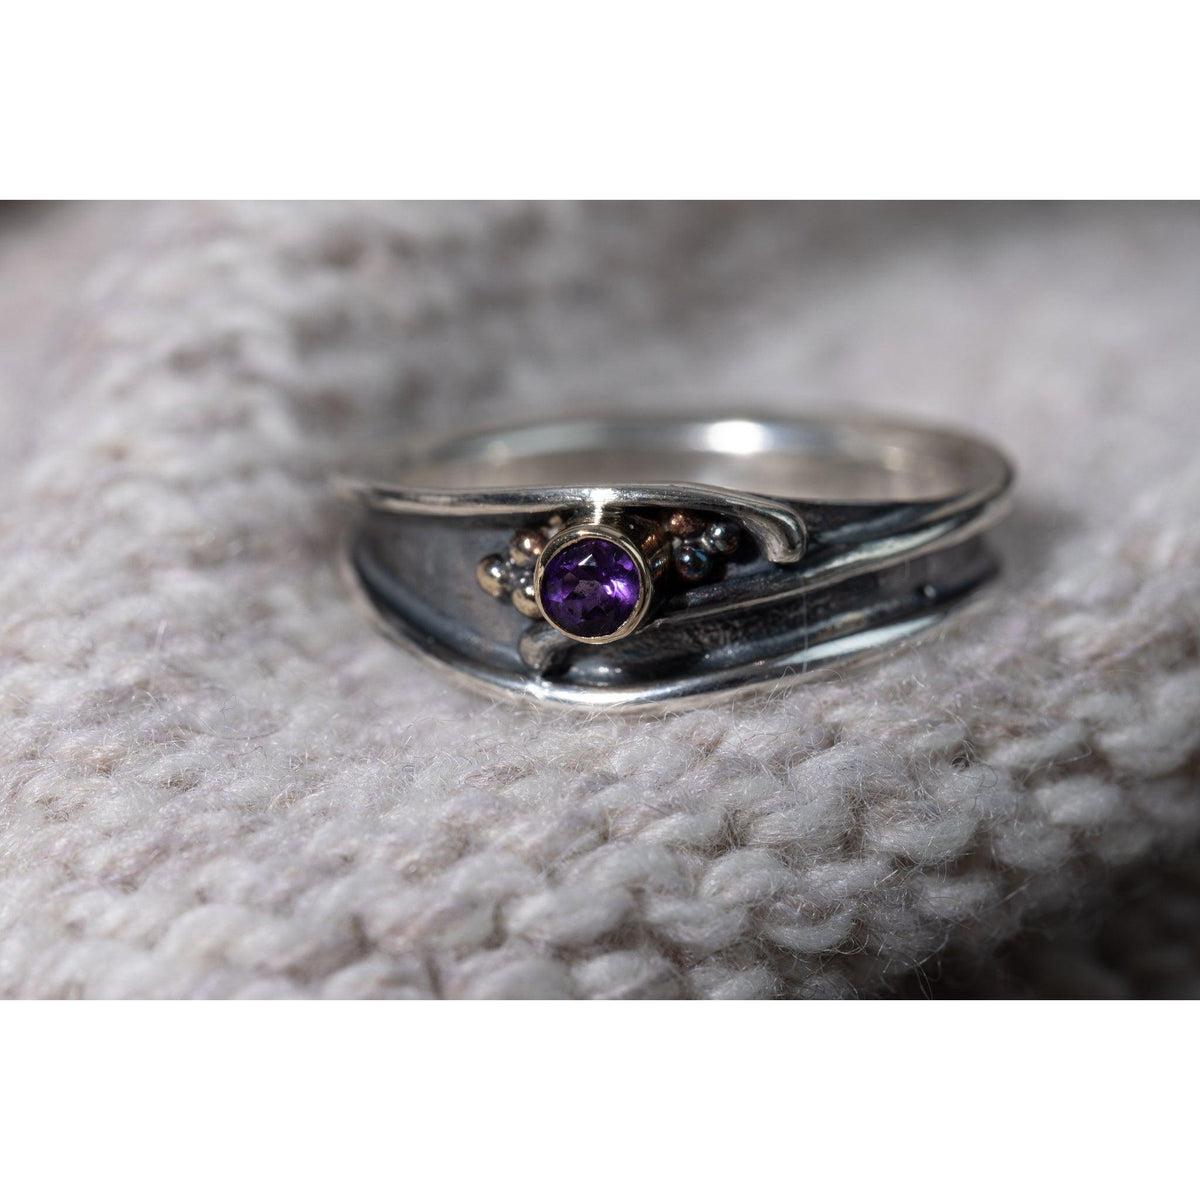 &#39;LG67 - Silver Ring with 9ct Gold 3.5mm Amethyst Ring &#39; by Les Grimshaw, available at Padstow Gallery, Cornwall